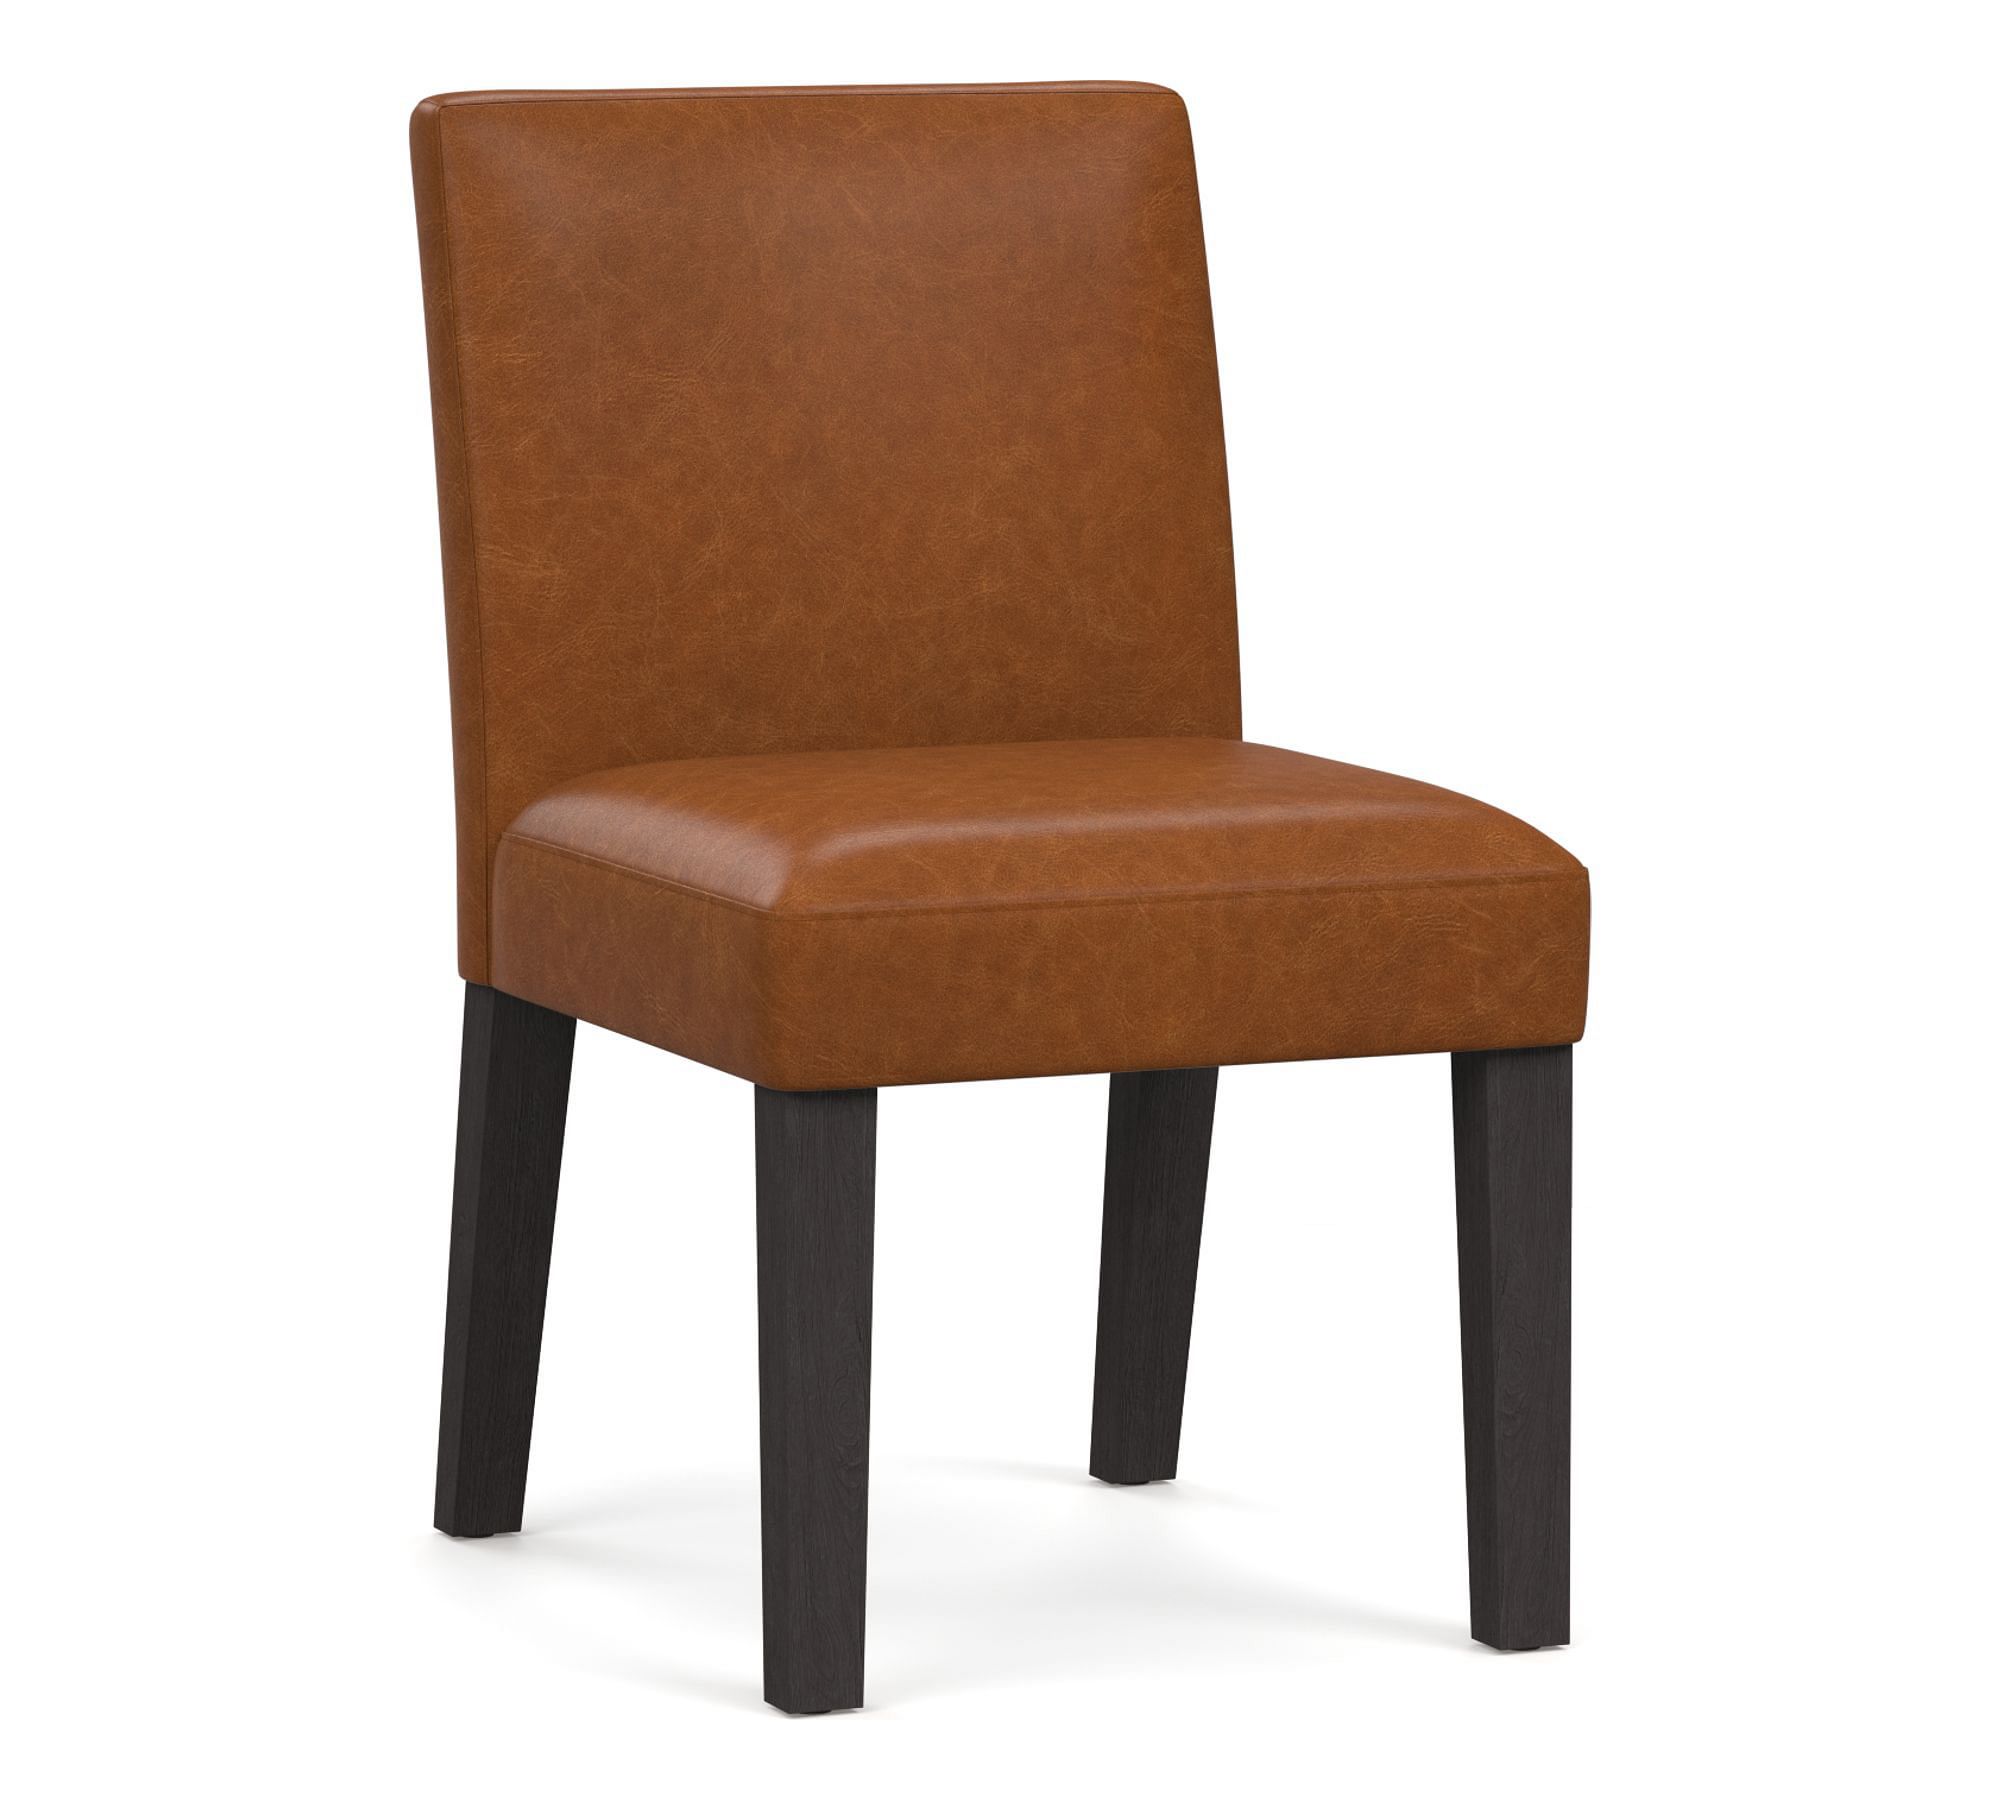 Open Box: Classic Leather Dining Chair